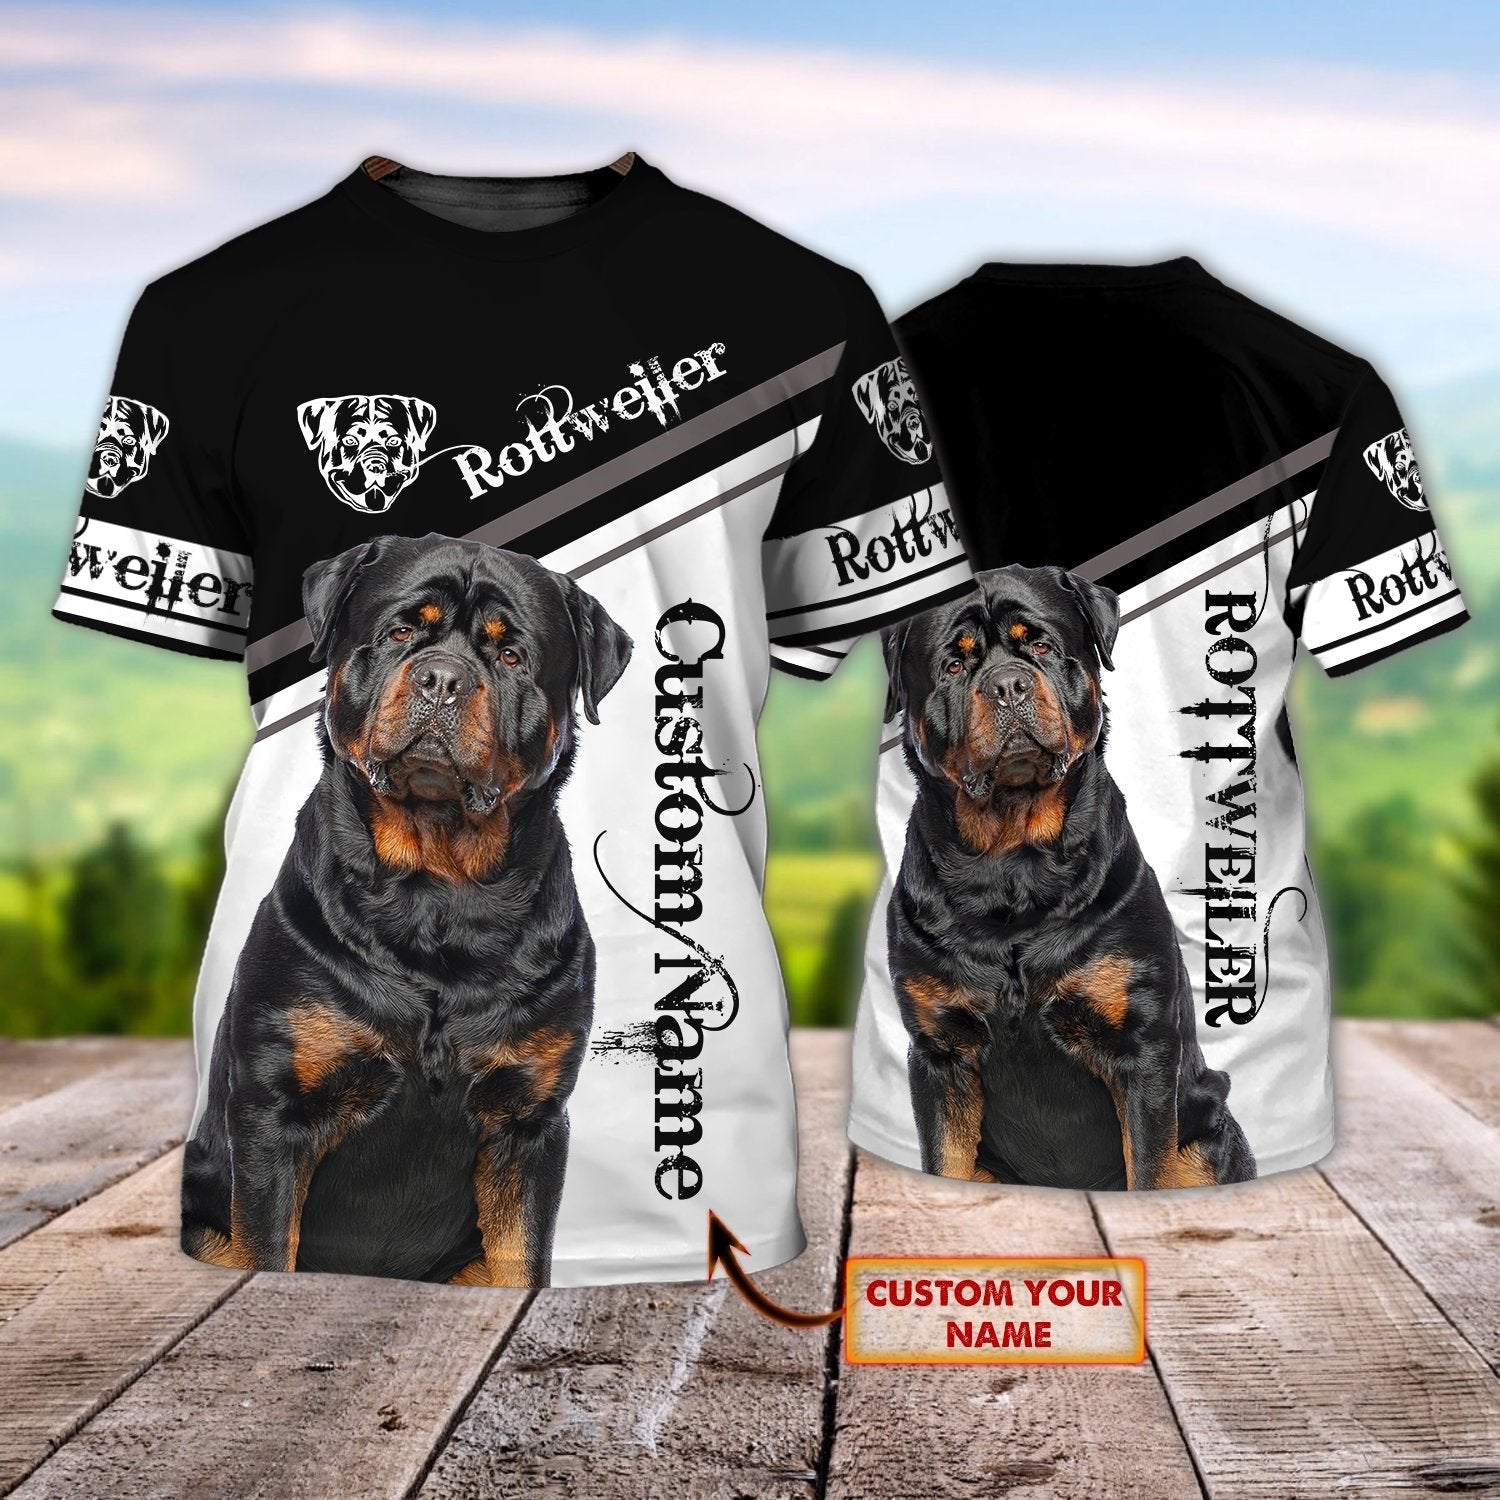 Personalized Name 3D Tshirt With Rottweiler/ Cute Rottweiler Dog Shirt For Men Women